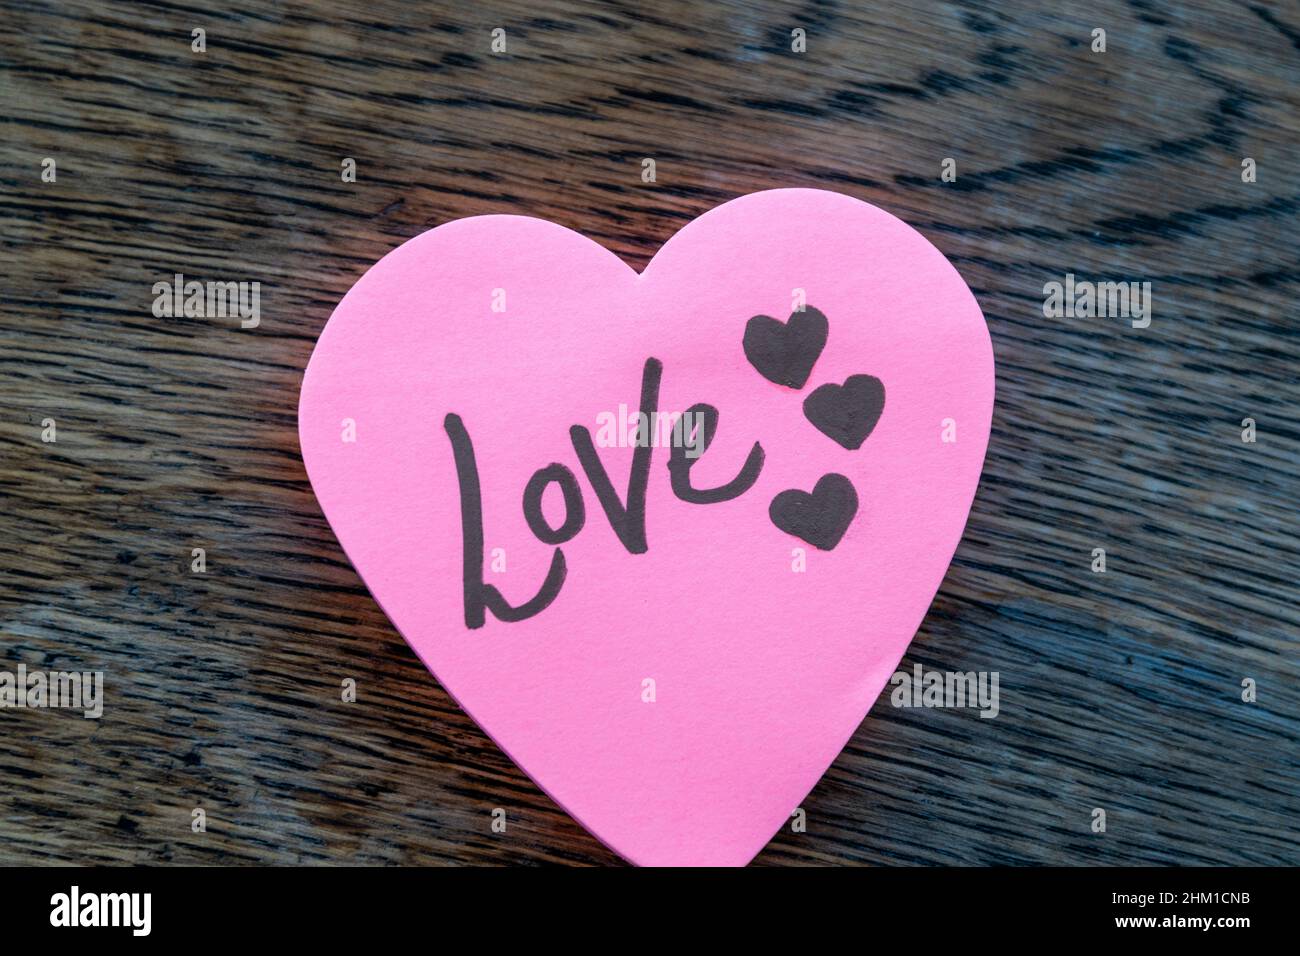 Love hand wrote text on pink love heart with drawn hearts. On rustic wooden background. Love Valentines concept. Stock Photo